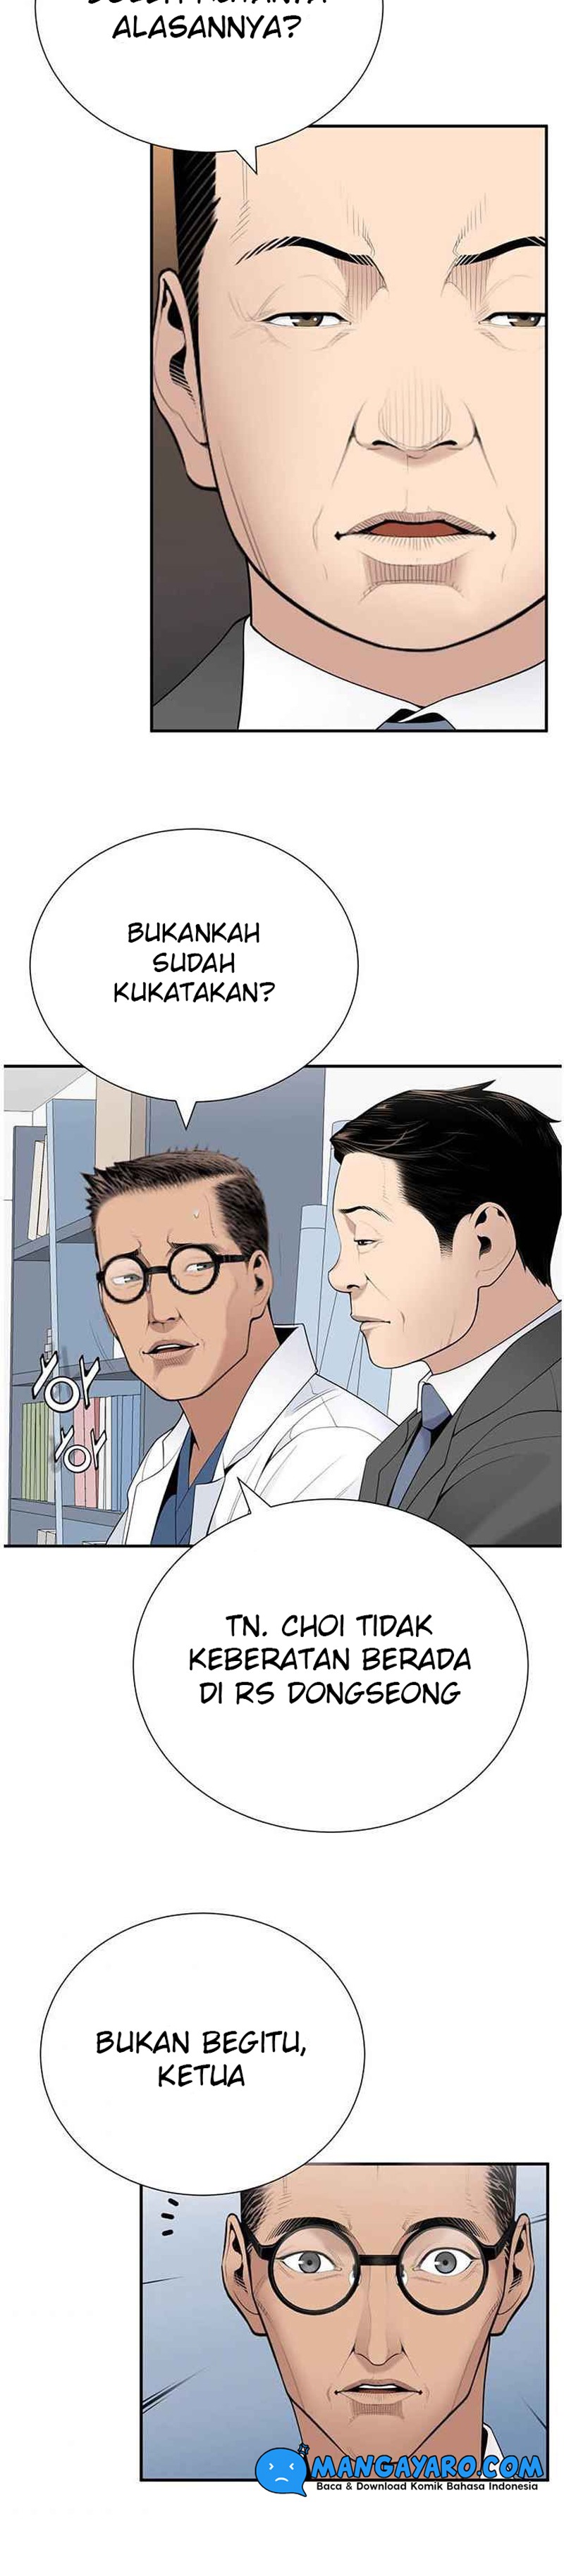 Dr. Choi Tae-Soo Chapter 27